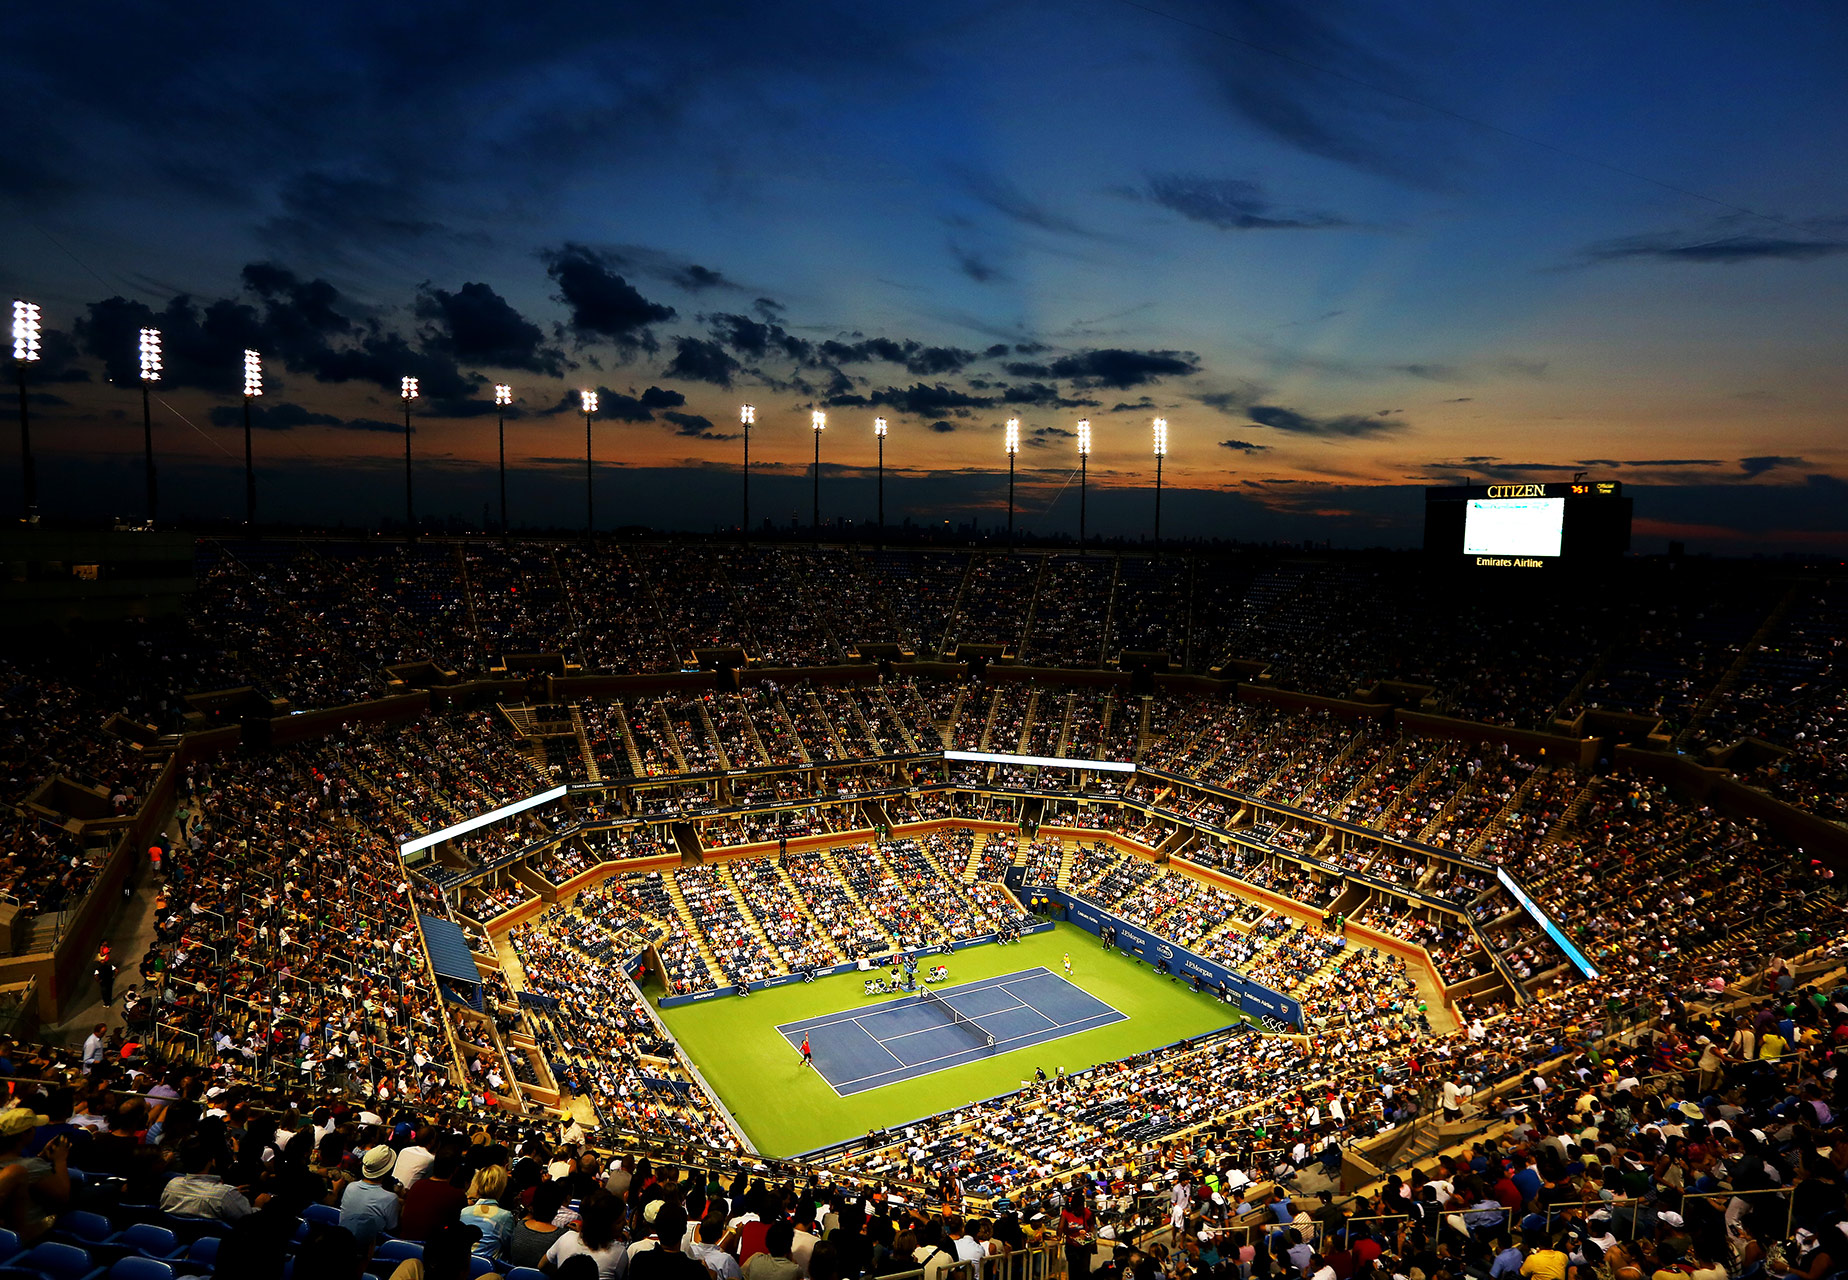 US Open-US Open Tennis Championship: Session 4 - Men's/Women's 1st Round tickets price and order